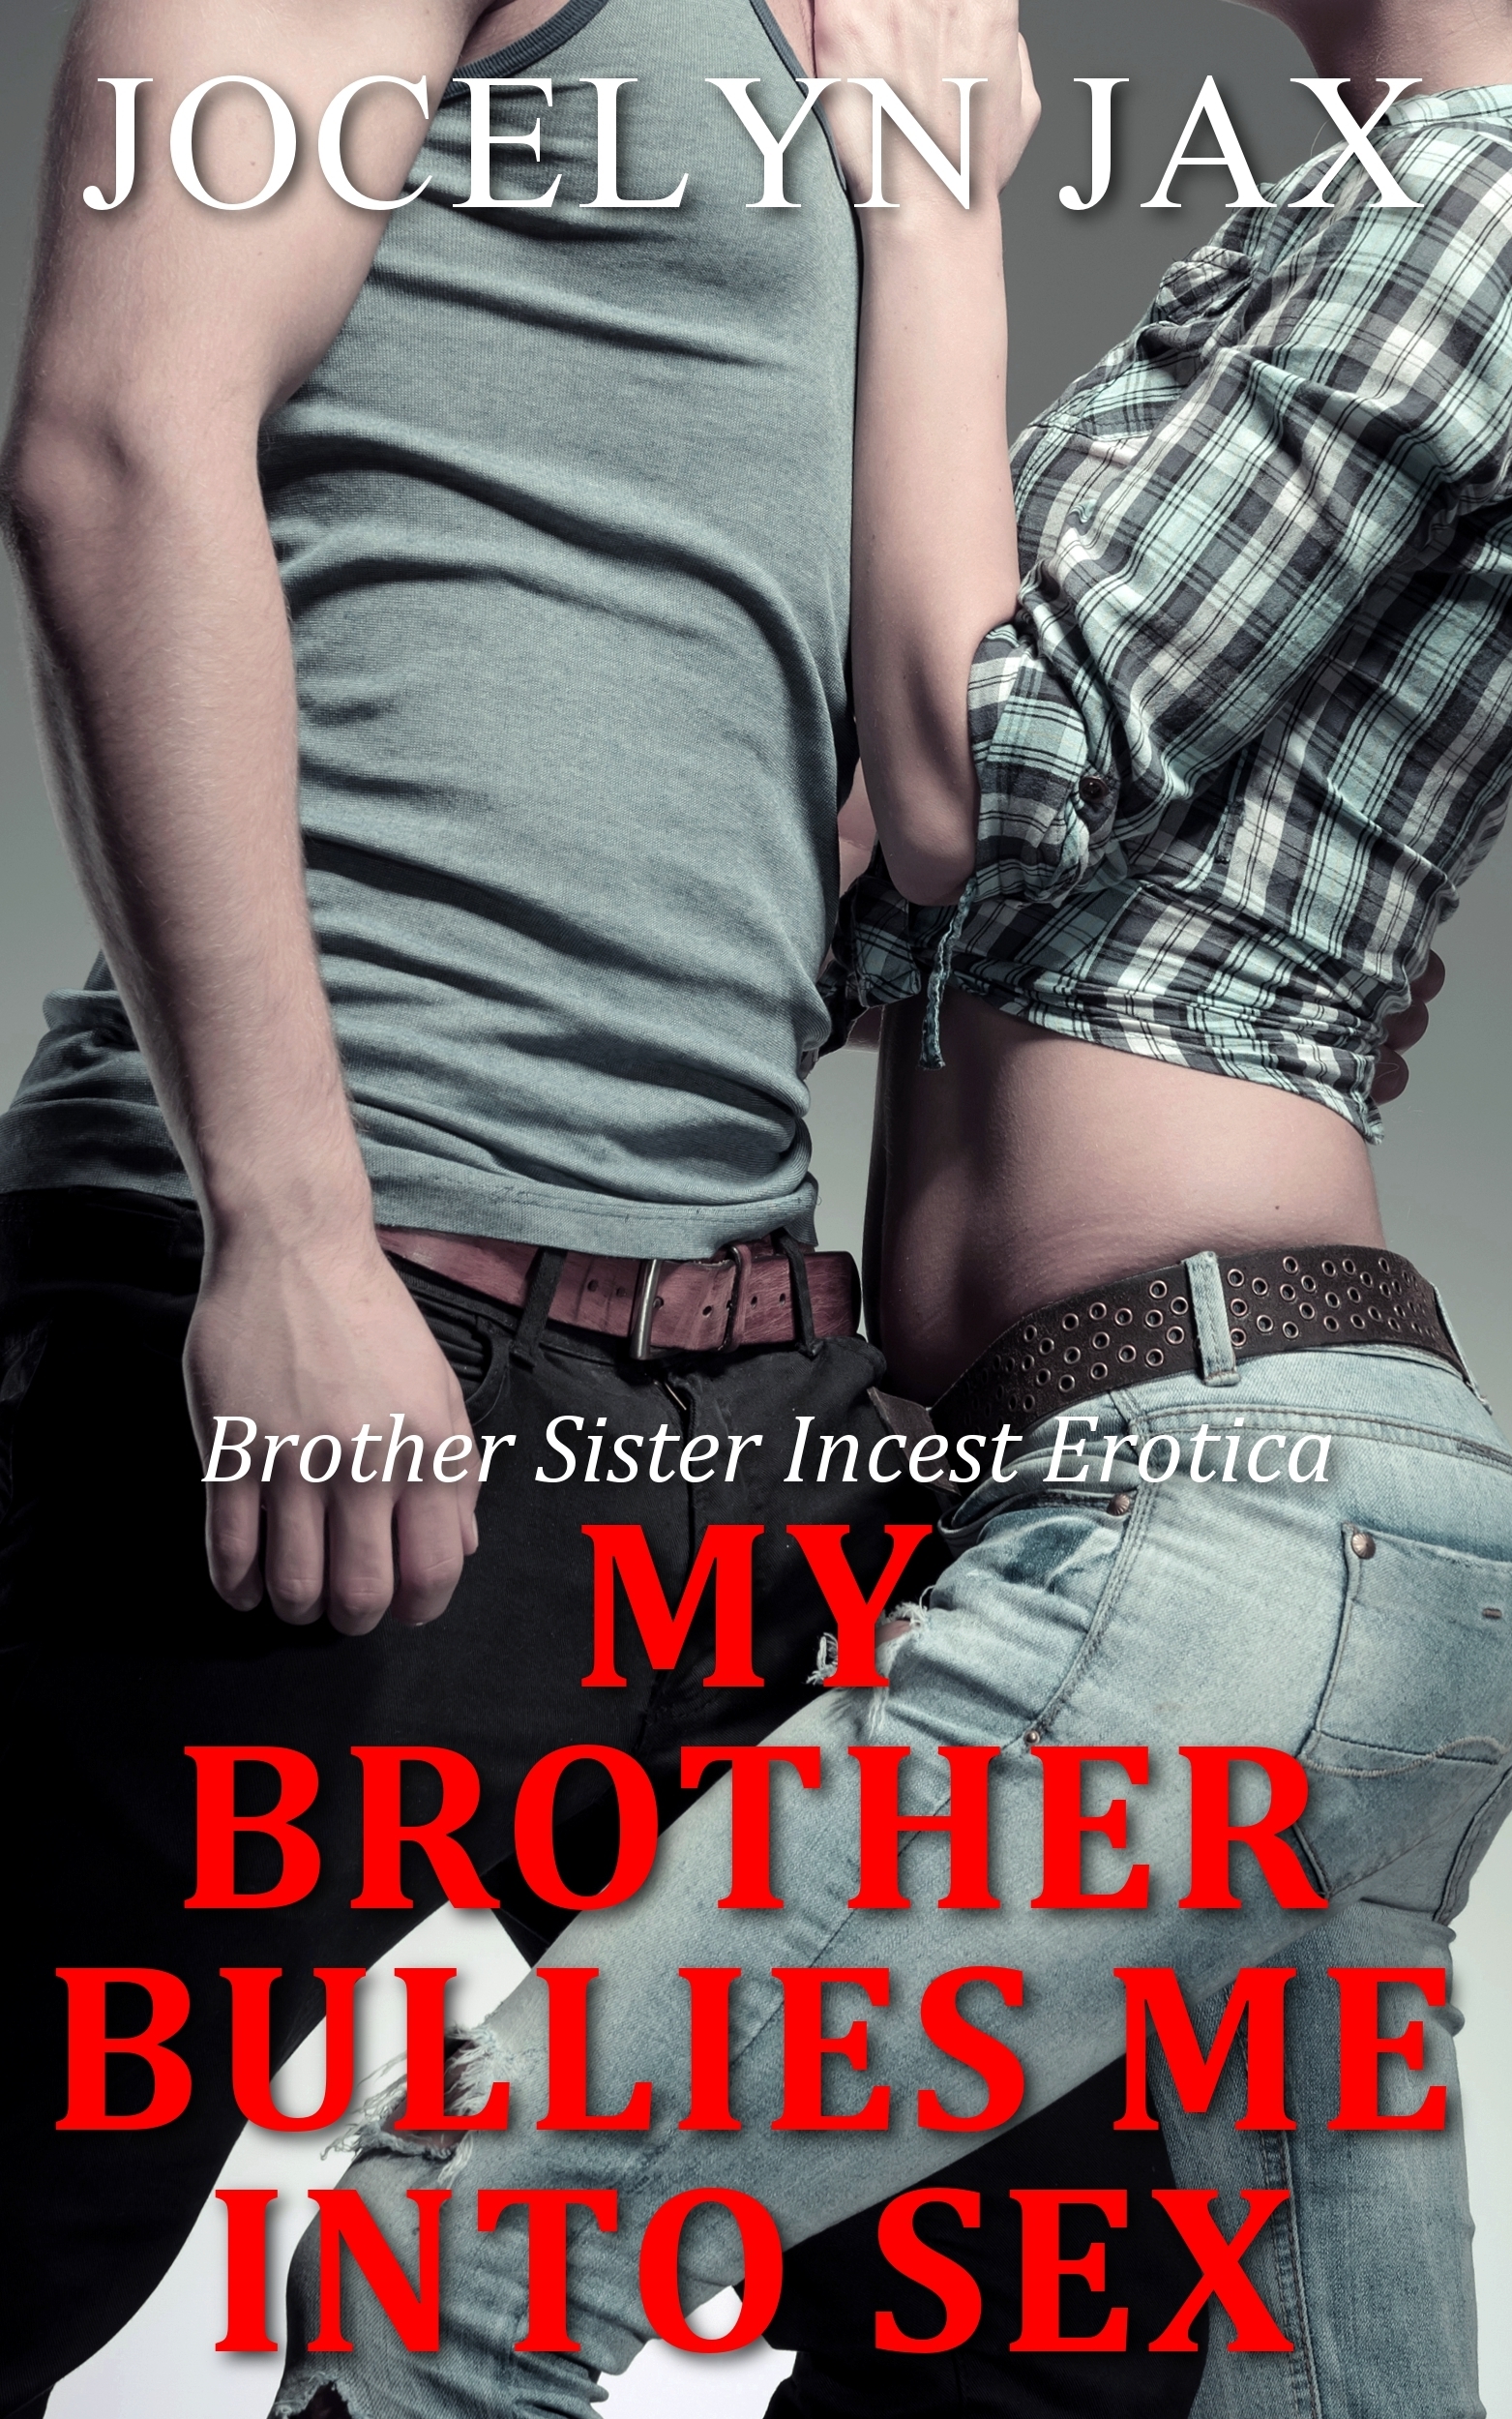 chris scovill recommends Brother To Brother Incest